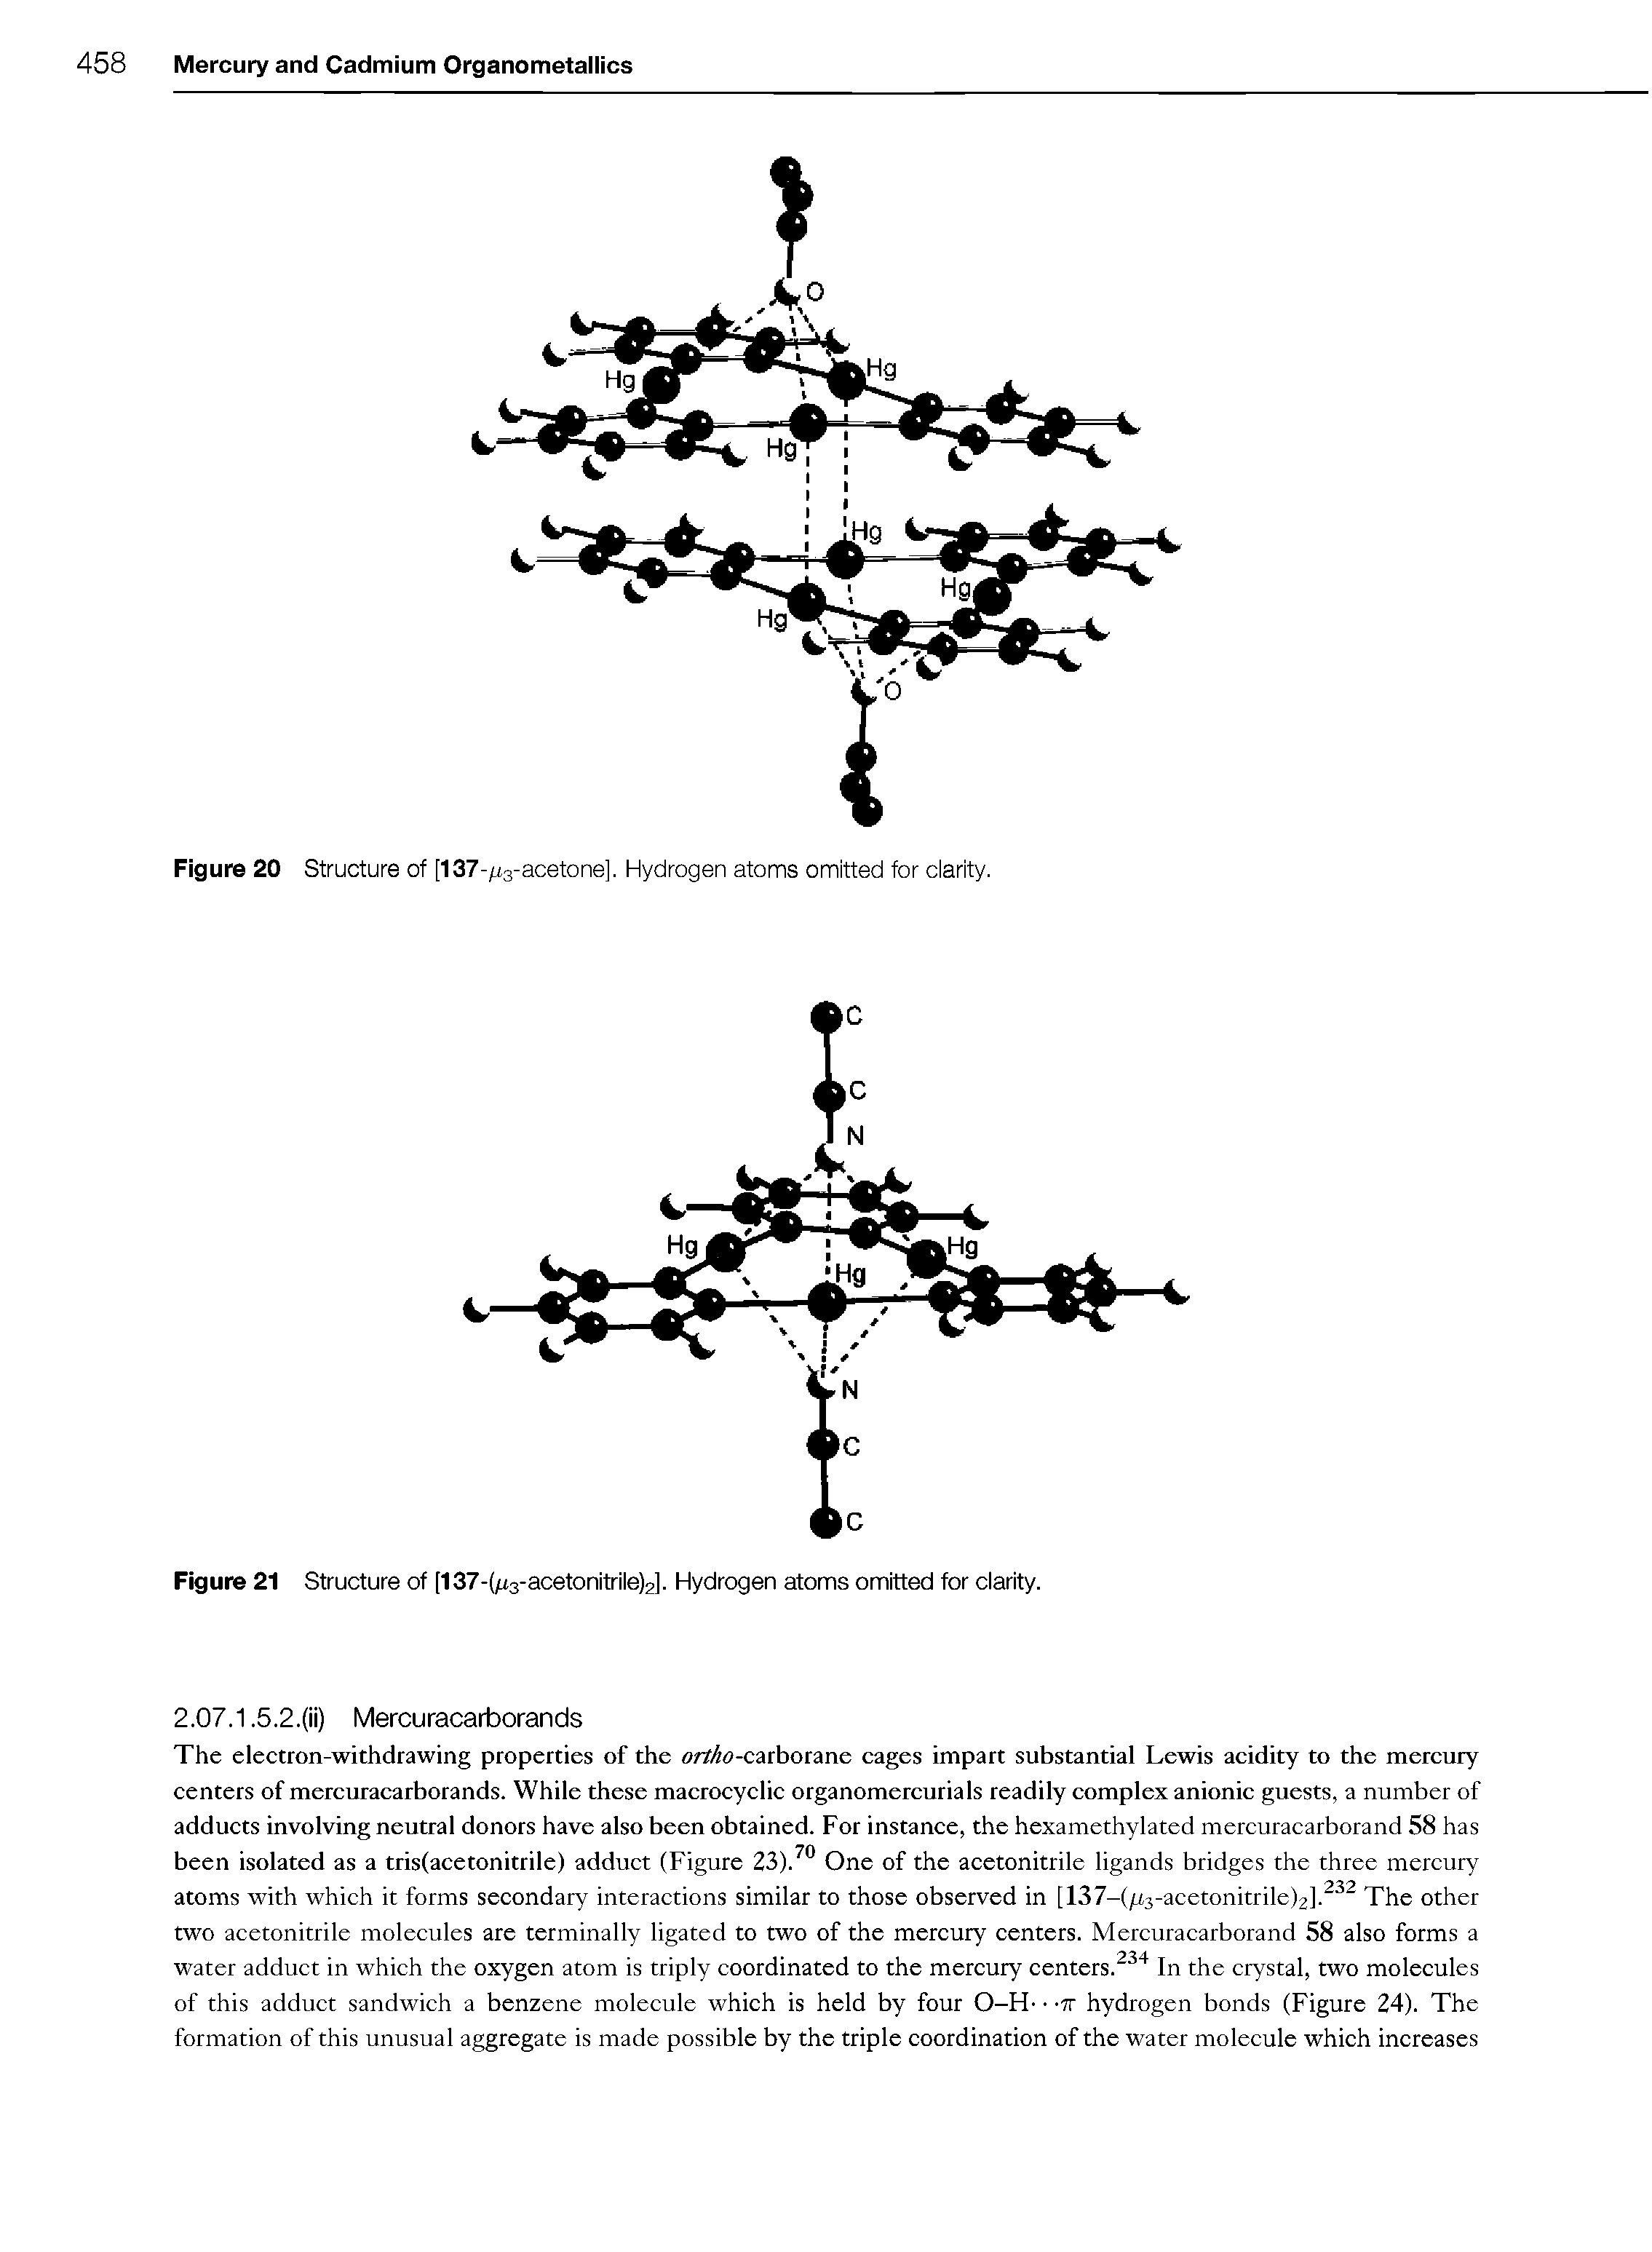 Figure 20 Structure of [137-/i3-acetone], Hydrogen atoms omitted for clarity.